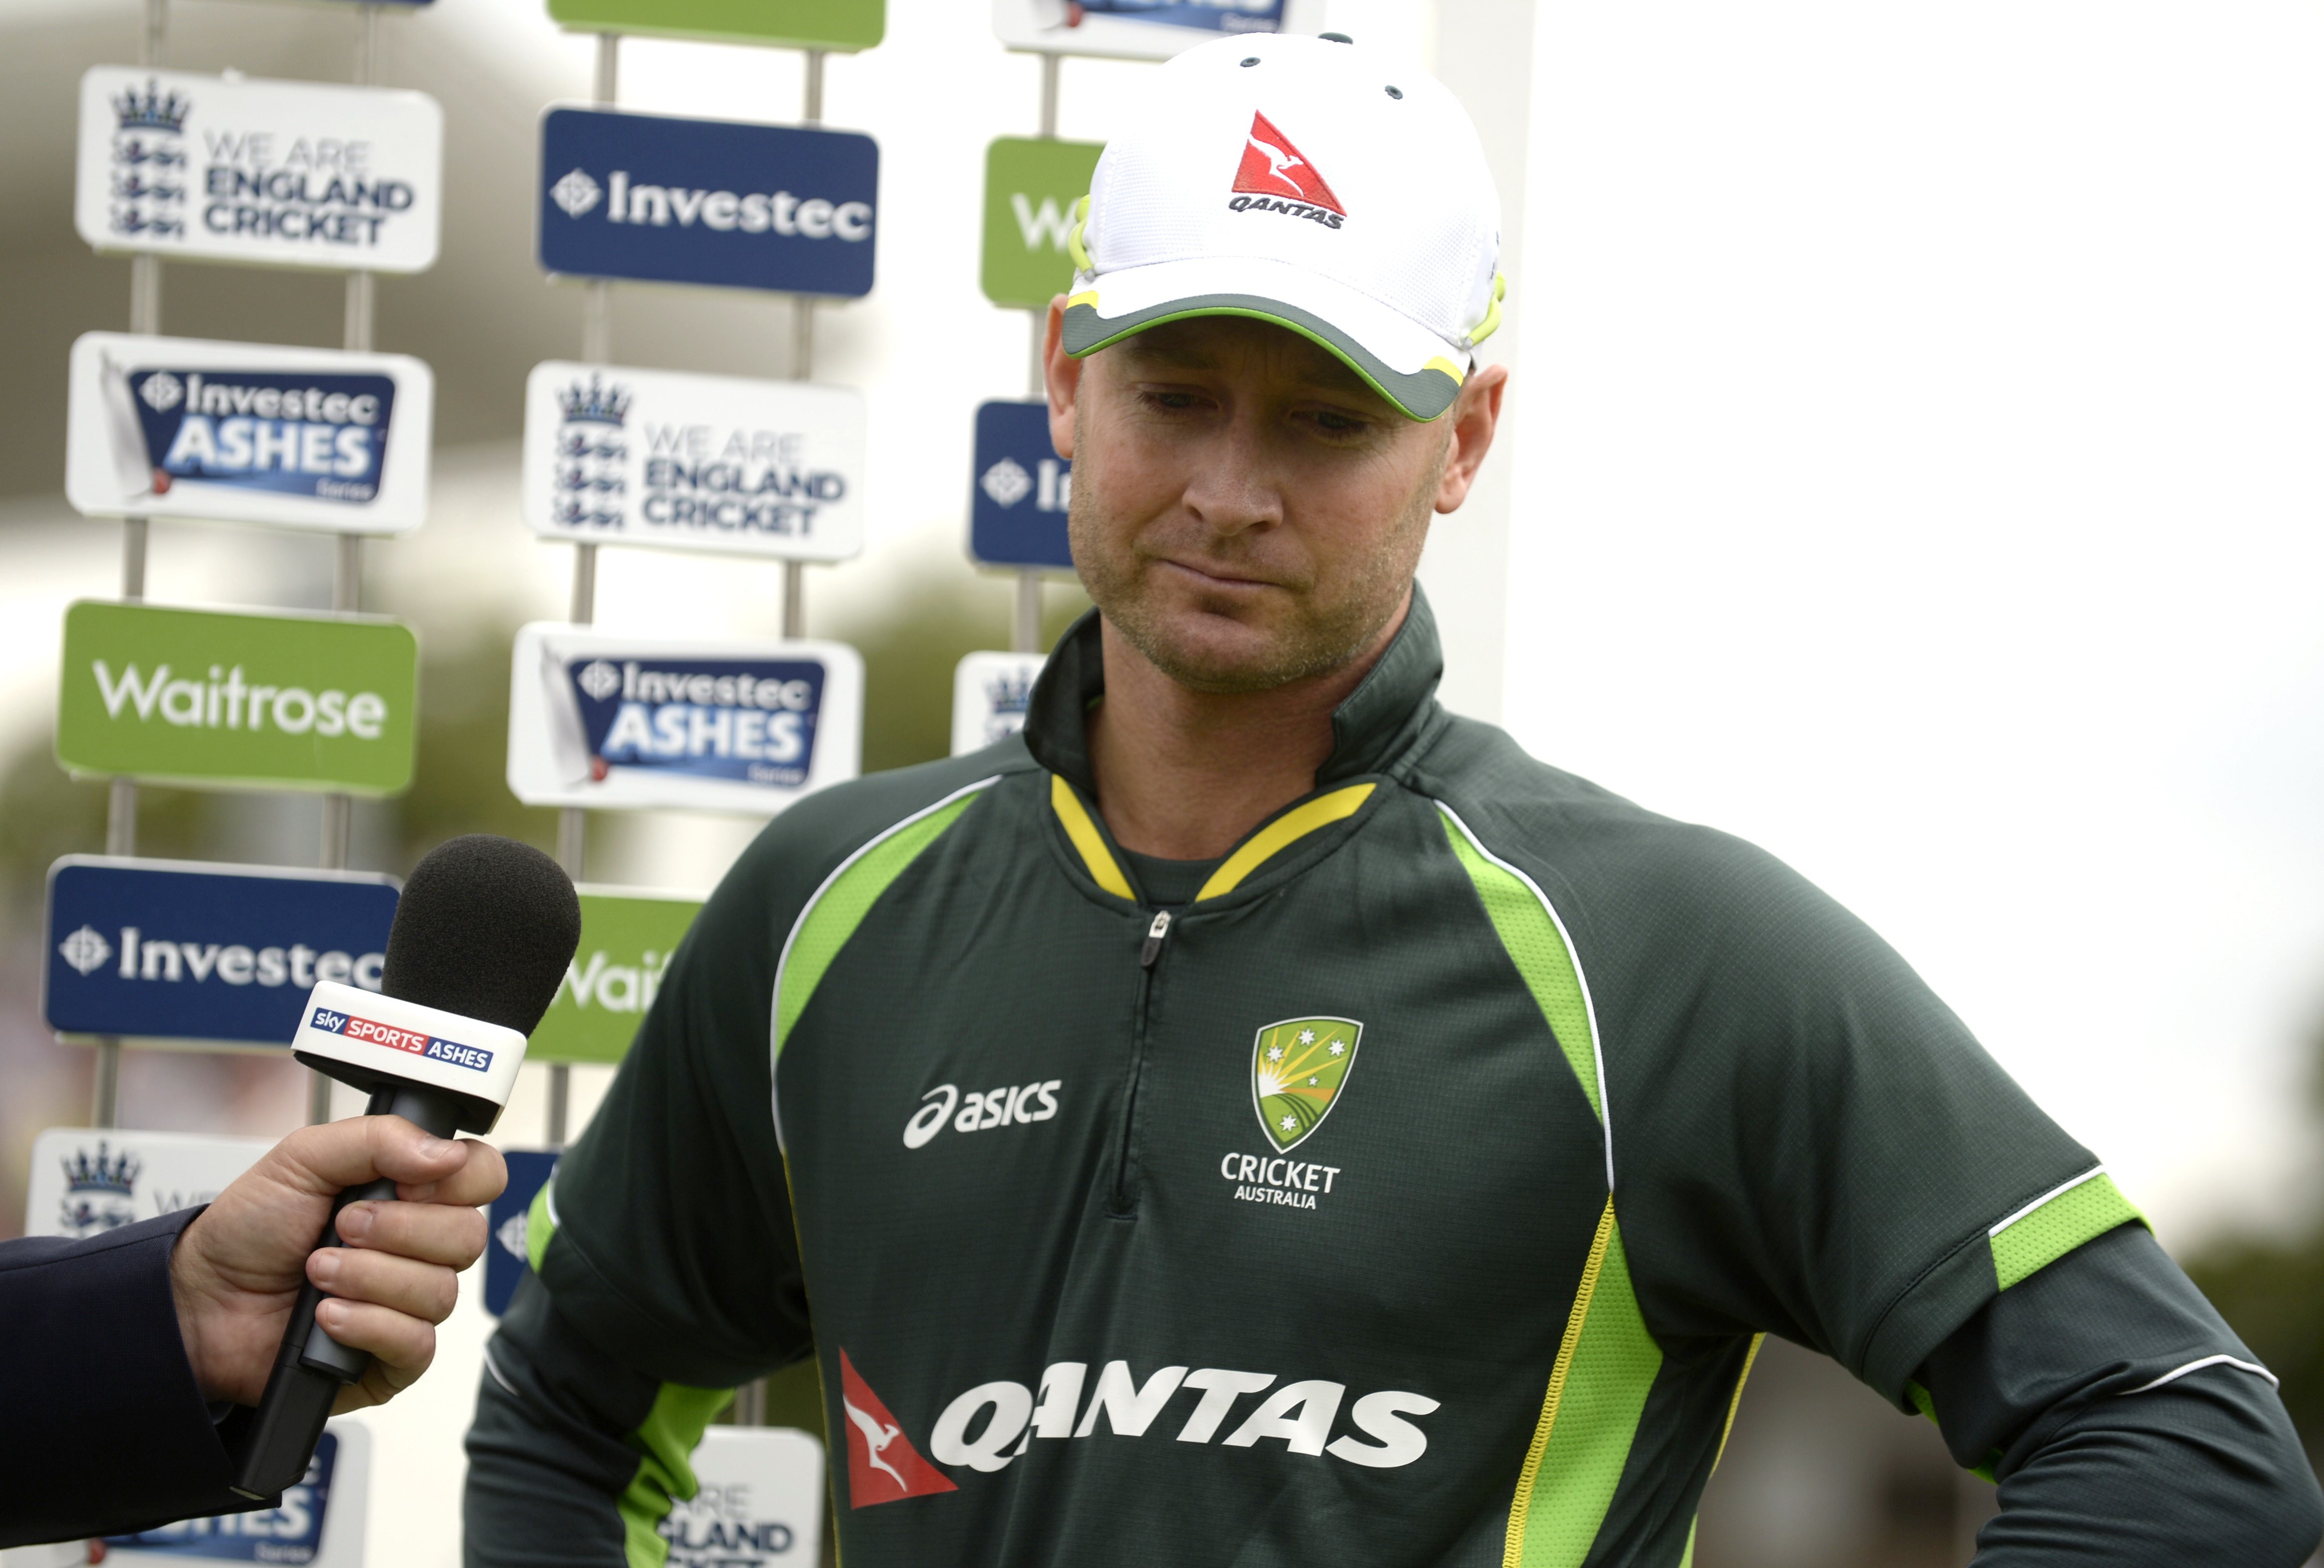 A dejected Australia captain Michael Clarke after losing the Ashes series to England. He announced his retirement soon after the loss at Trent Bridge. Photos: Reuters